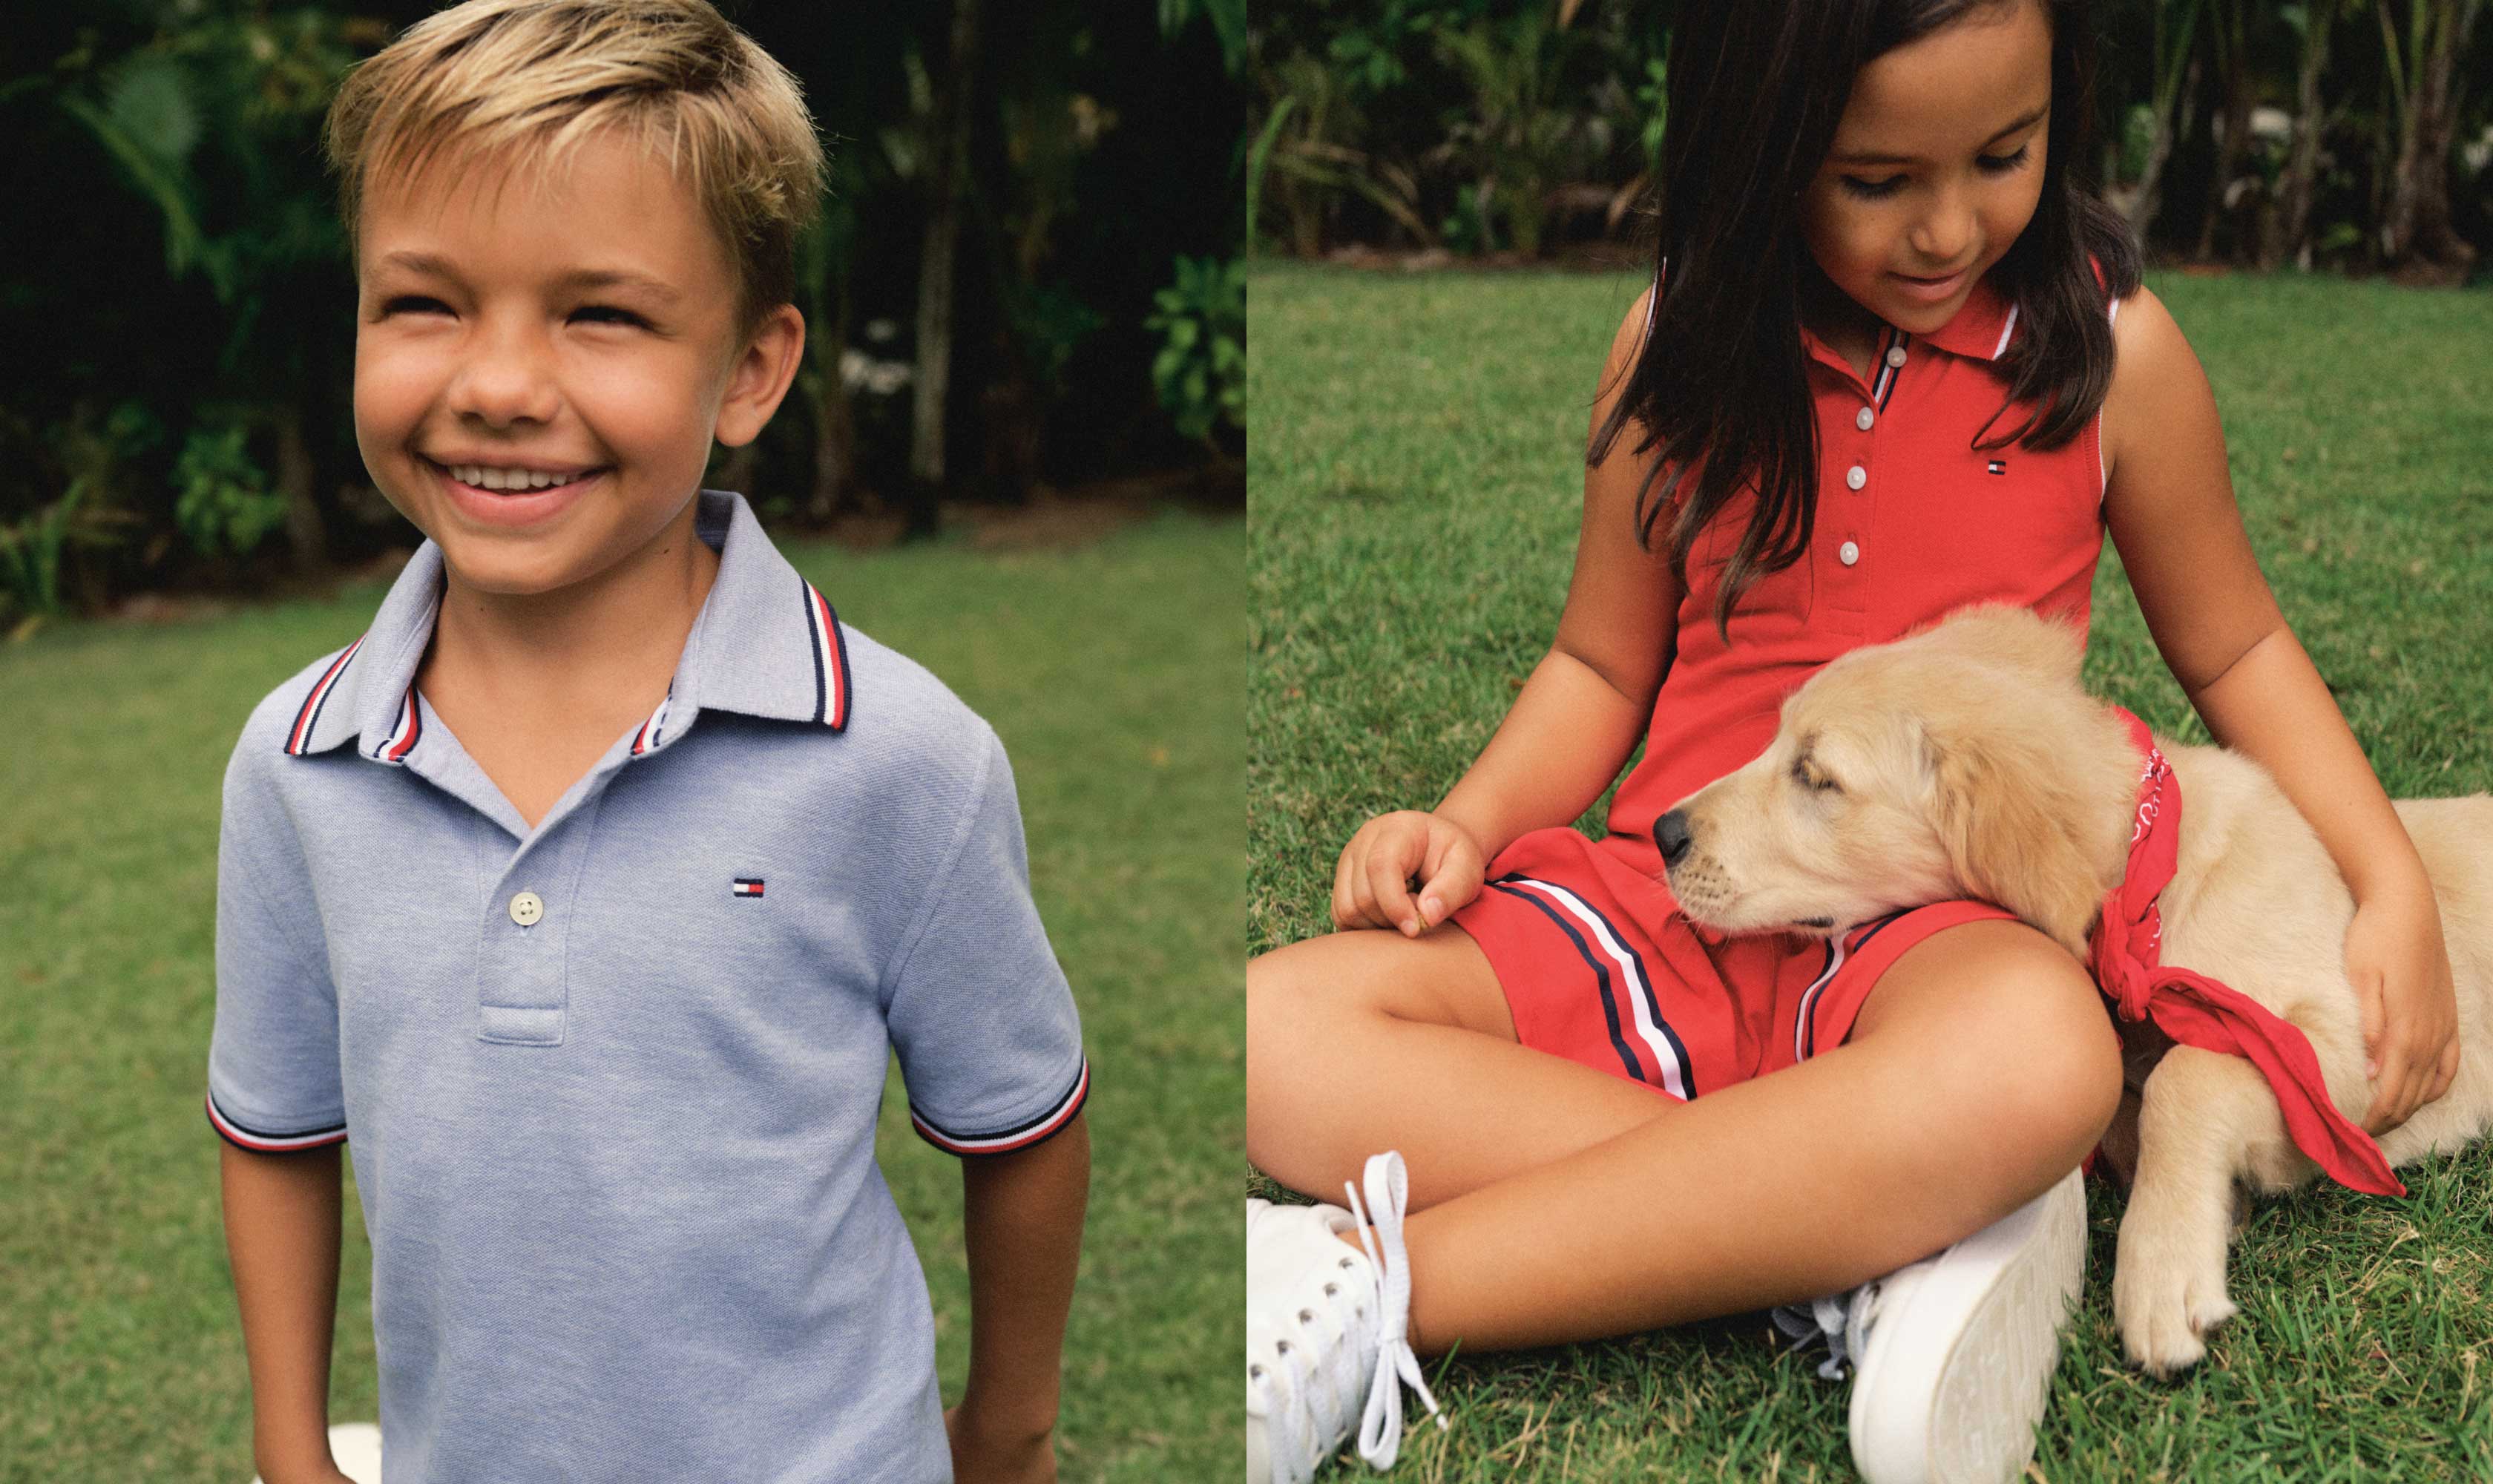 A boy and a girl each wear kids' polos from Tommy Hilfiger.